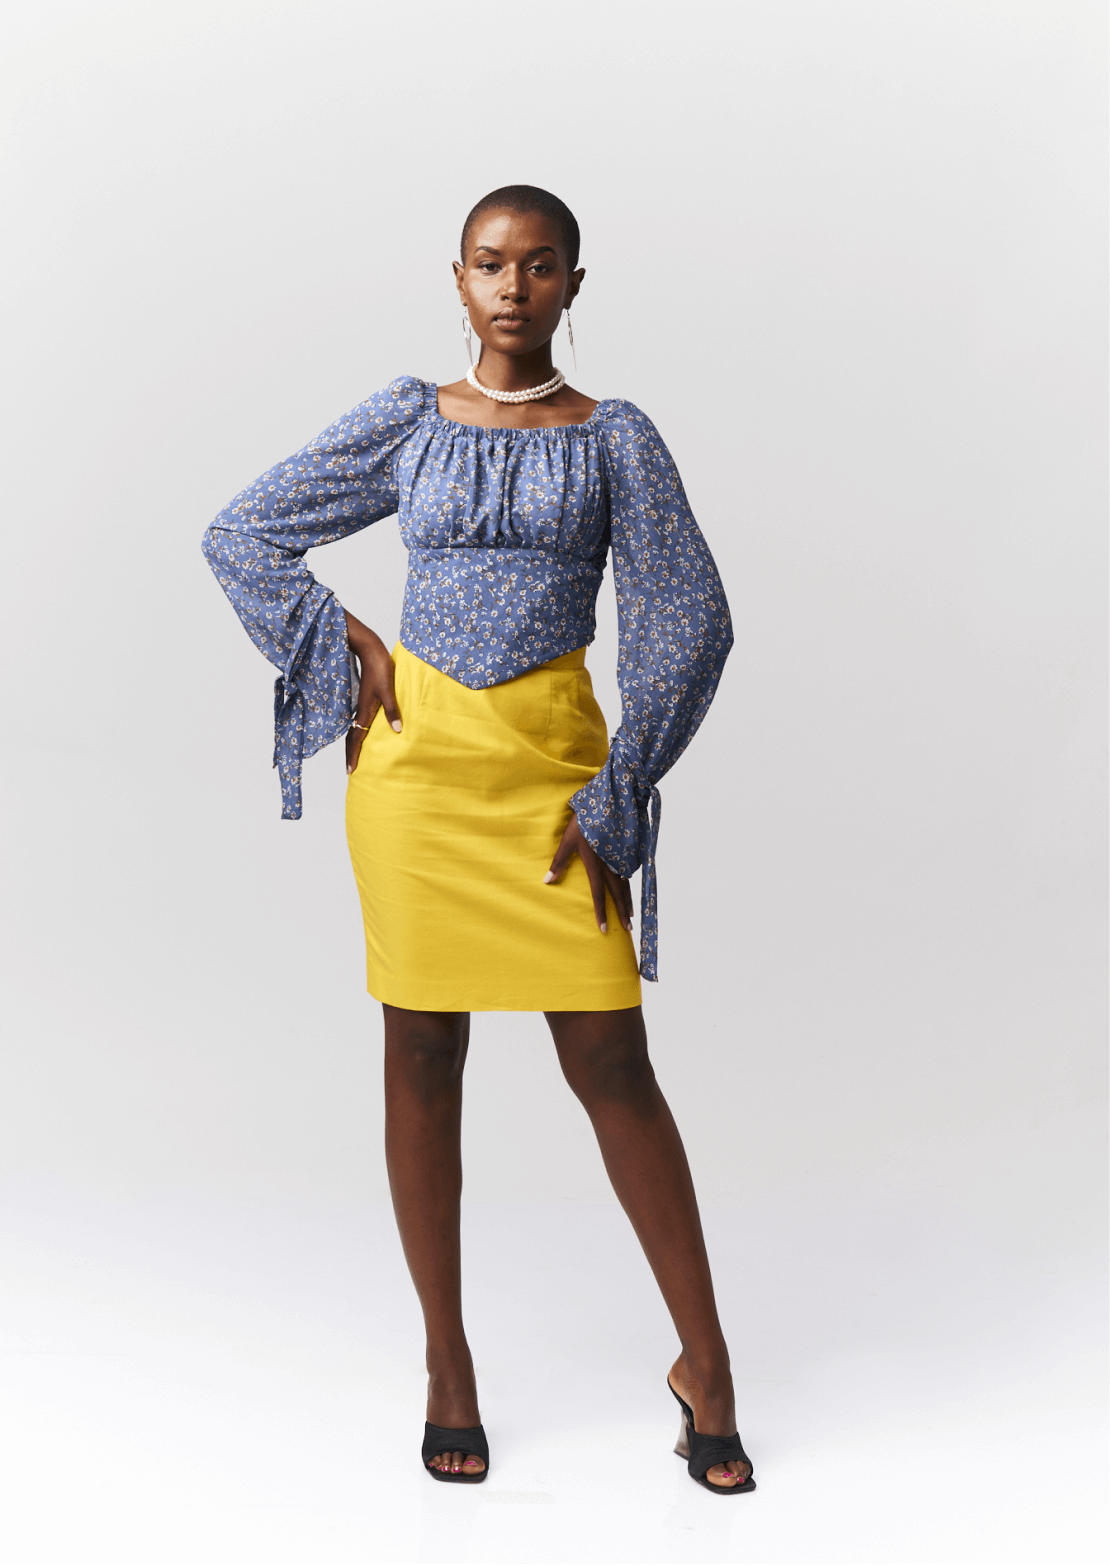 Shop Dalia Floral Bell Sleeve Top by Cyami Custom Fit on Arrai. Discover stylish, affordable clothing, jewelry, handbags and unique handmade pieces from top Kenyan & African fashion brands prioritising sustainability and quality craftsmanship.